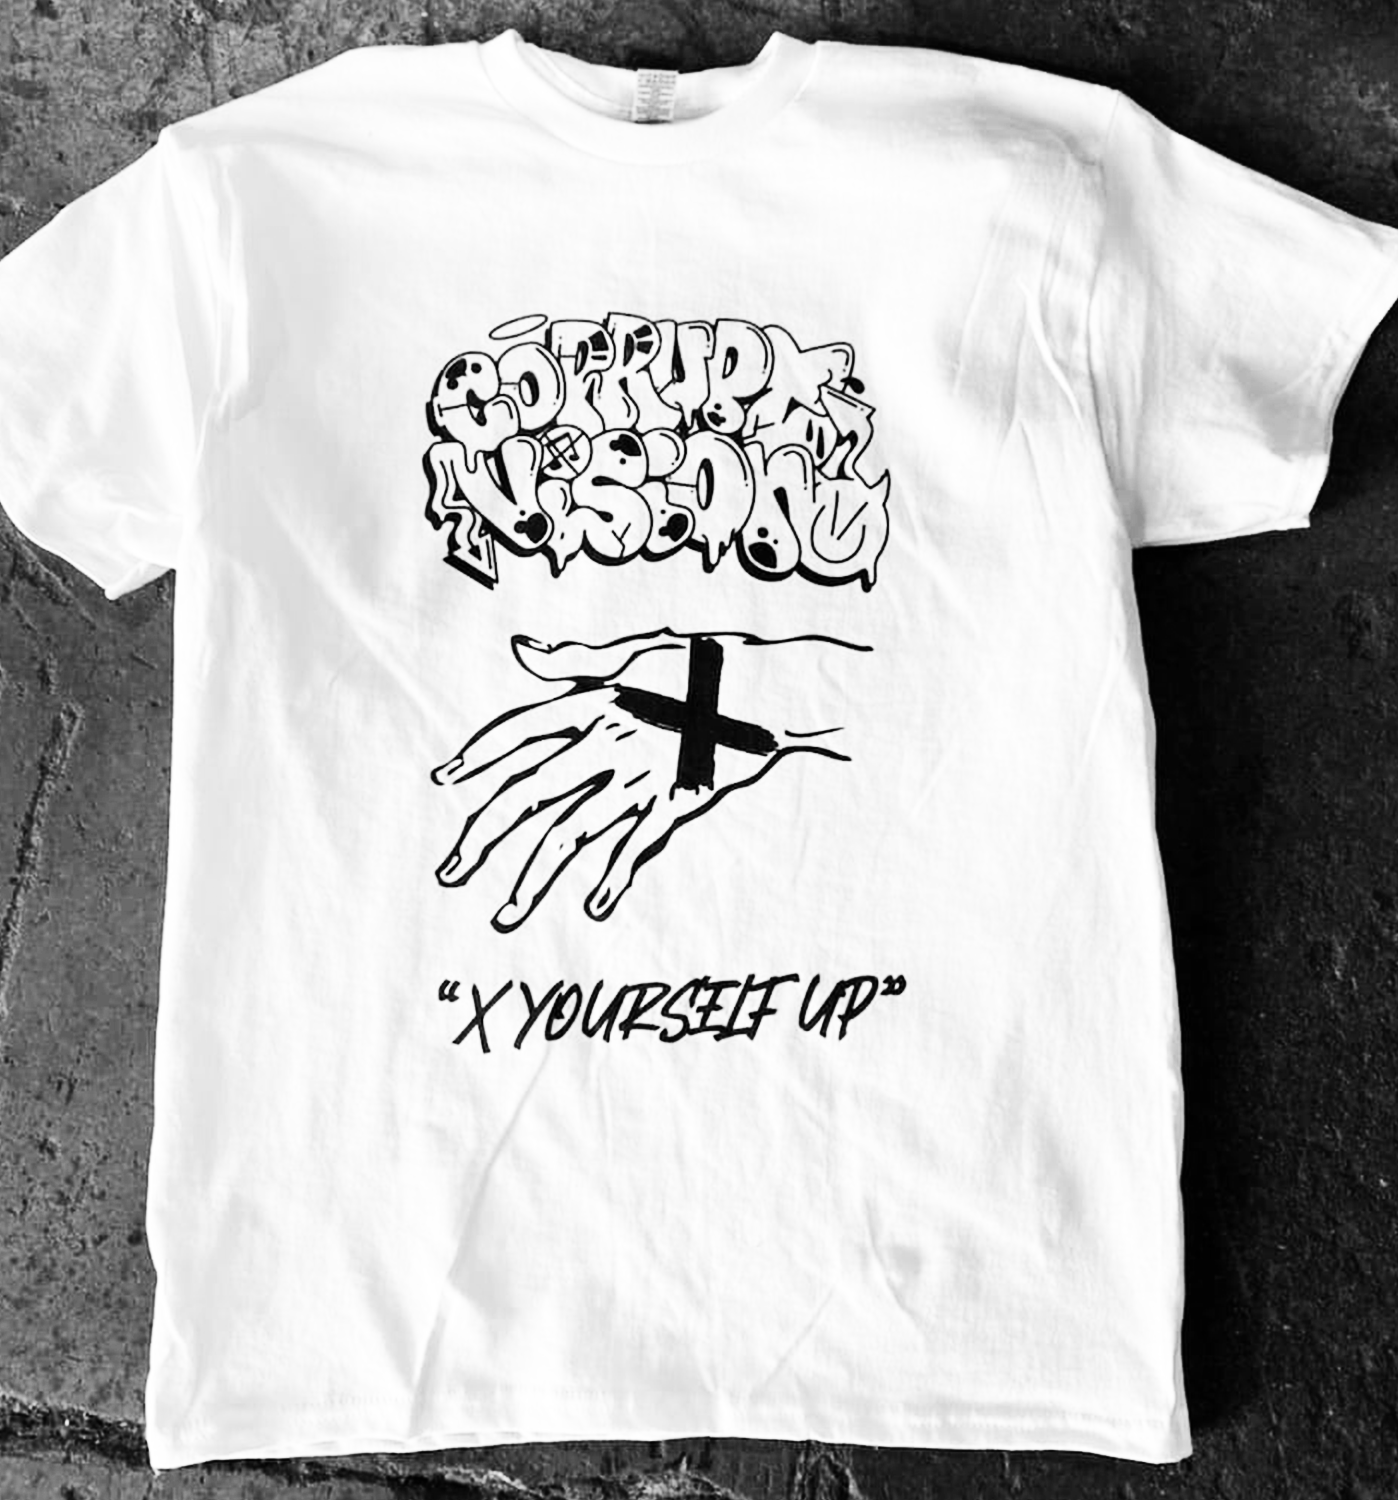 Corrupt Vision - "X YOURSELF UP" Shirt - XXL